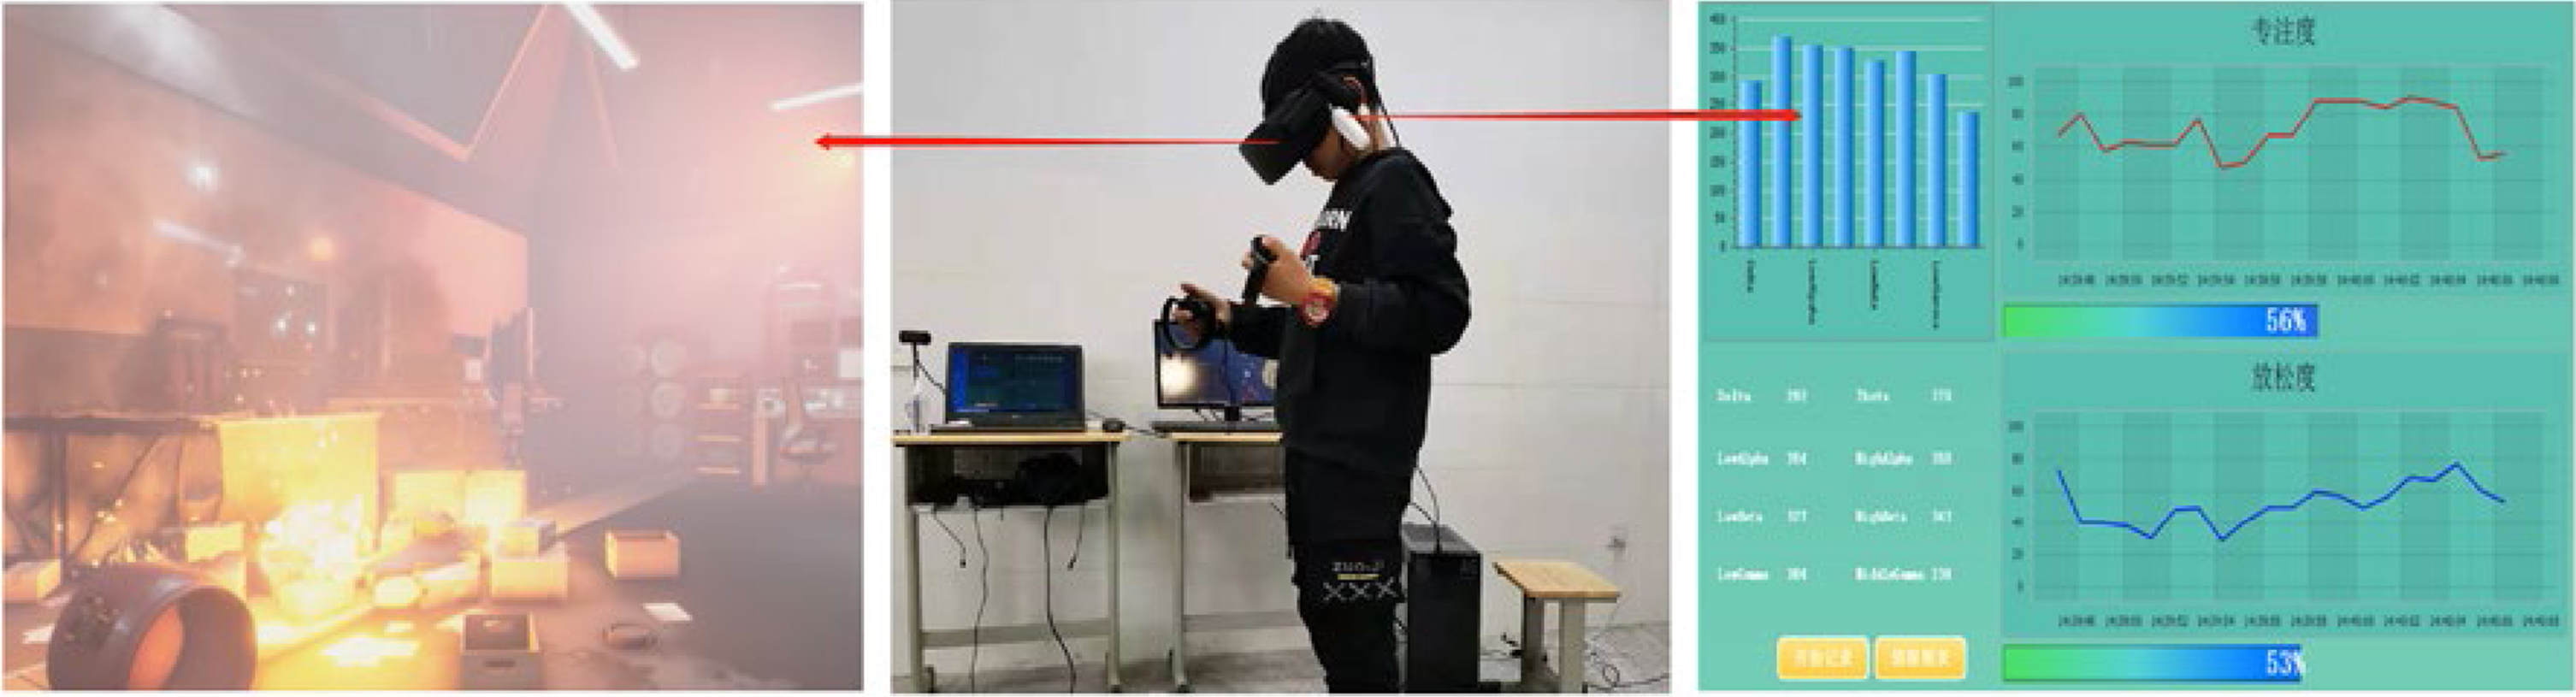 Immersive virtual reality integration system for EEG monitoring.